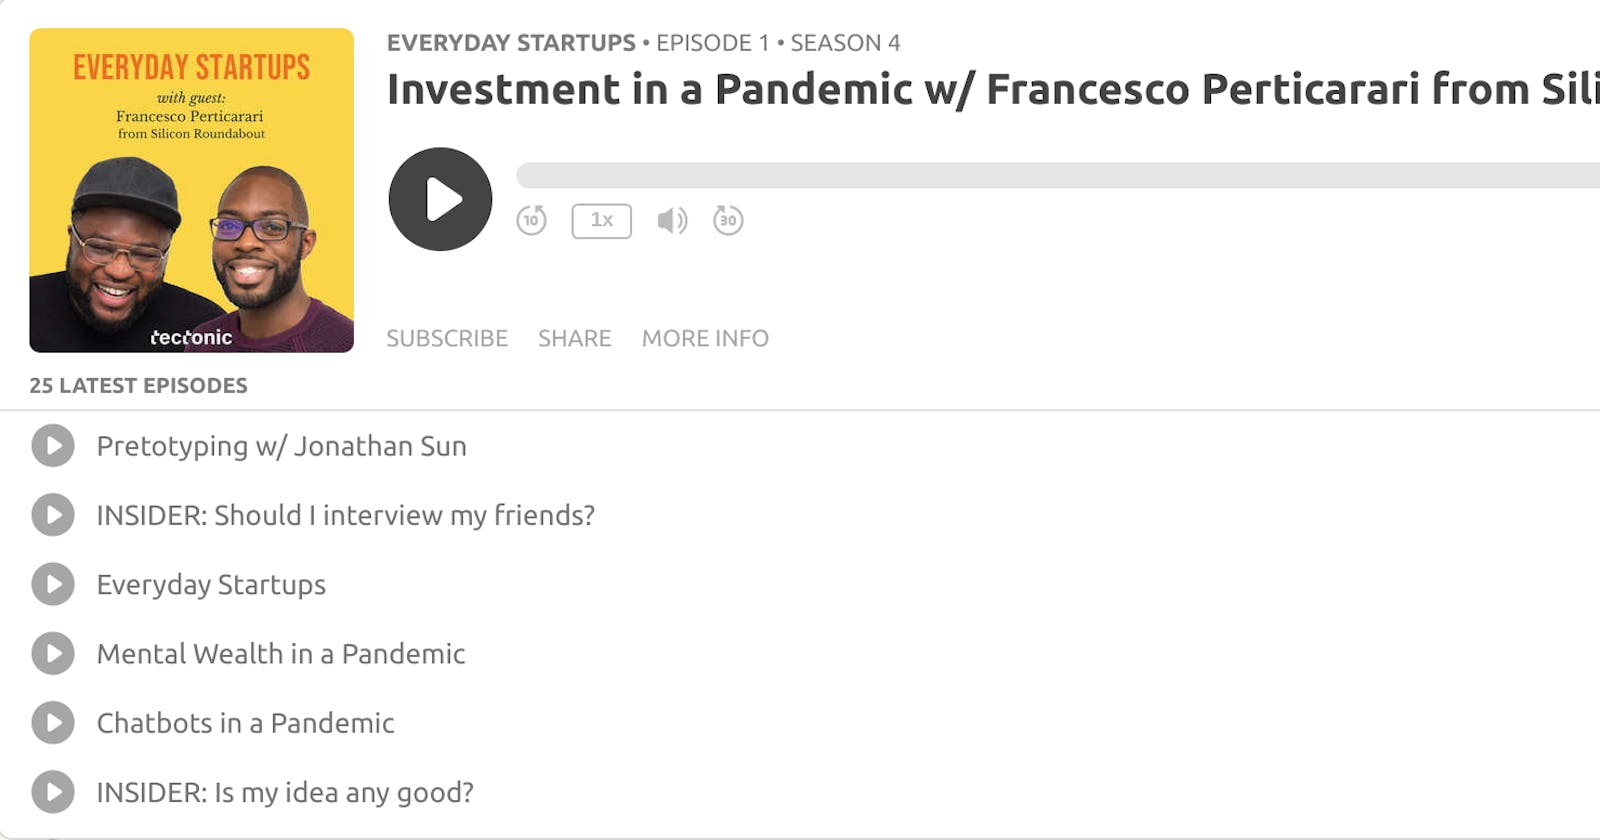 How to raise investment in a pandemic?